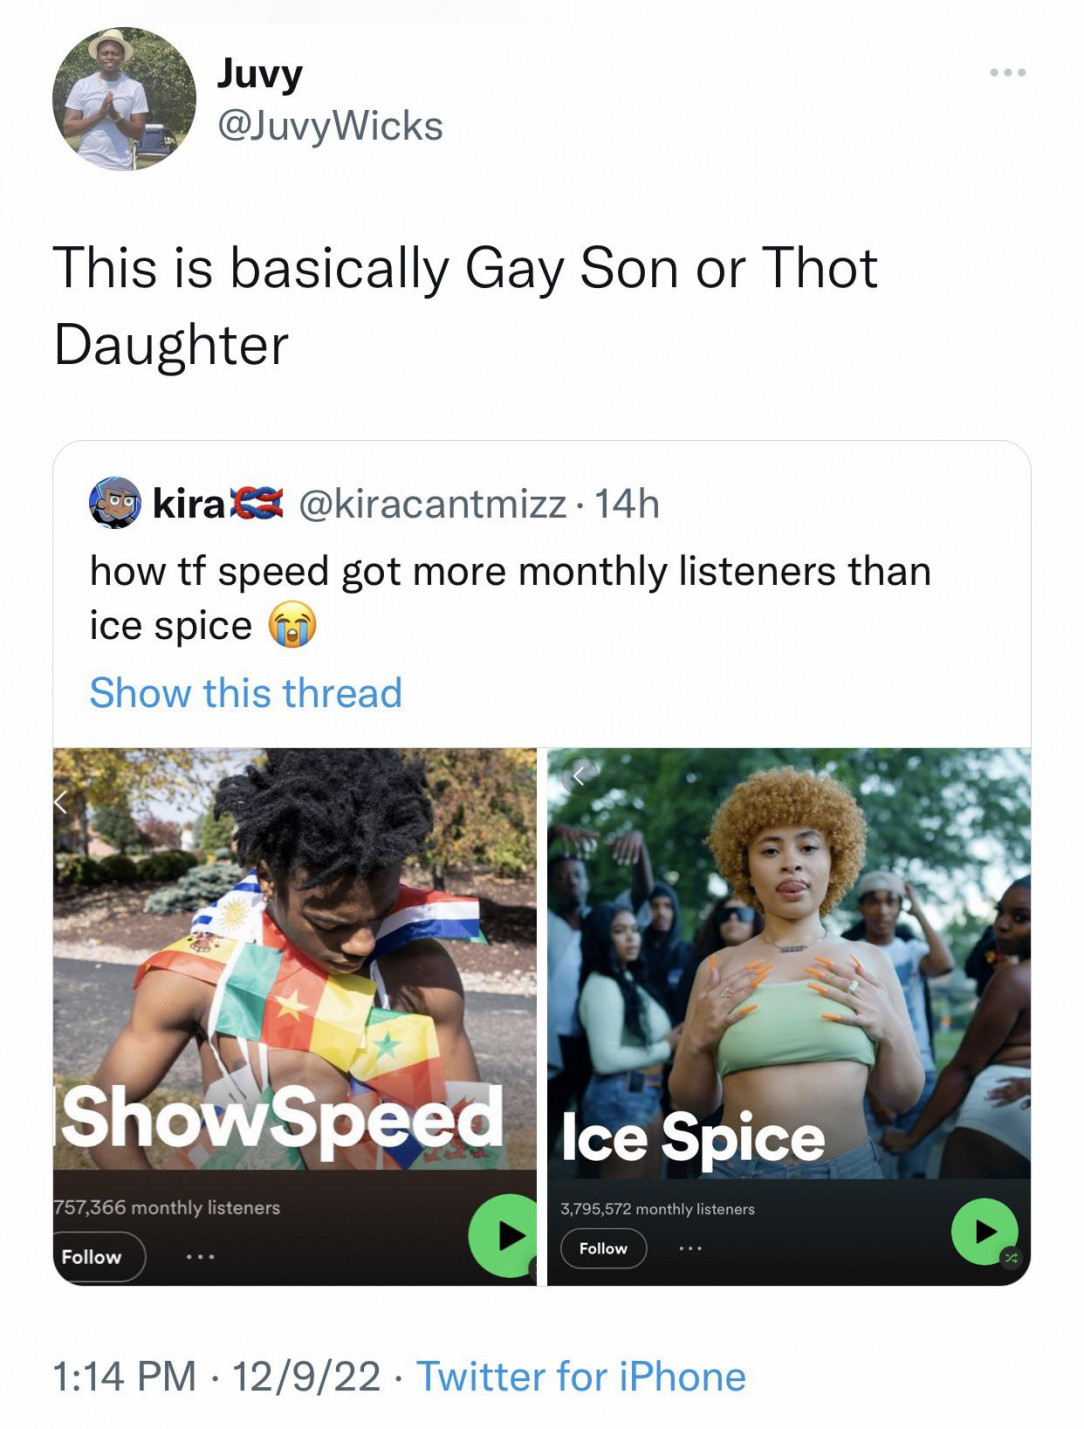 Would you rather have a Speed or an Ice Spice?